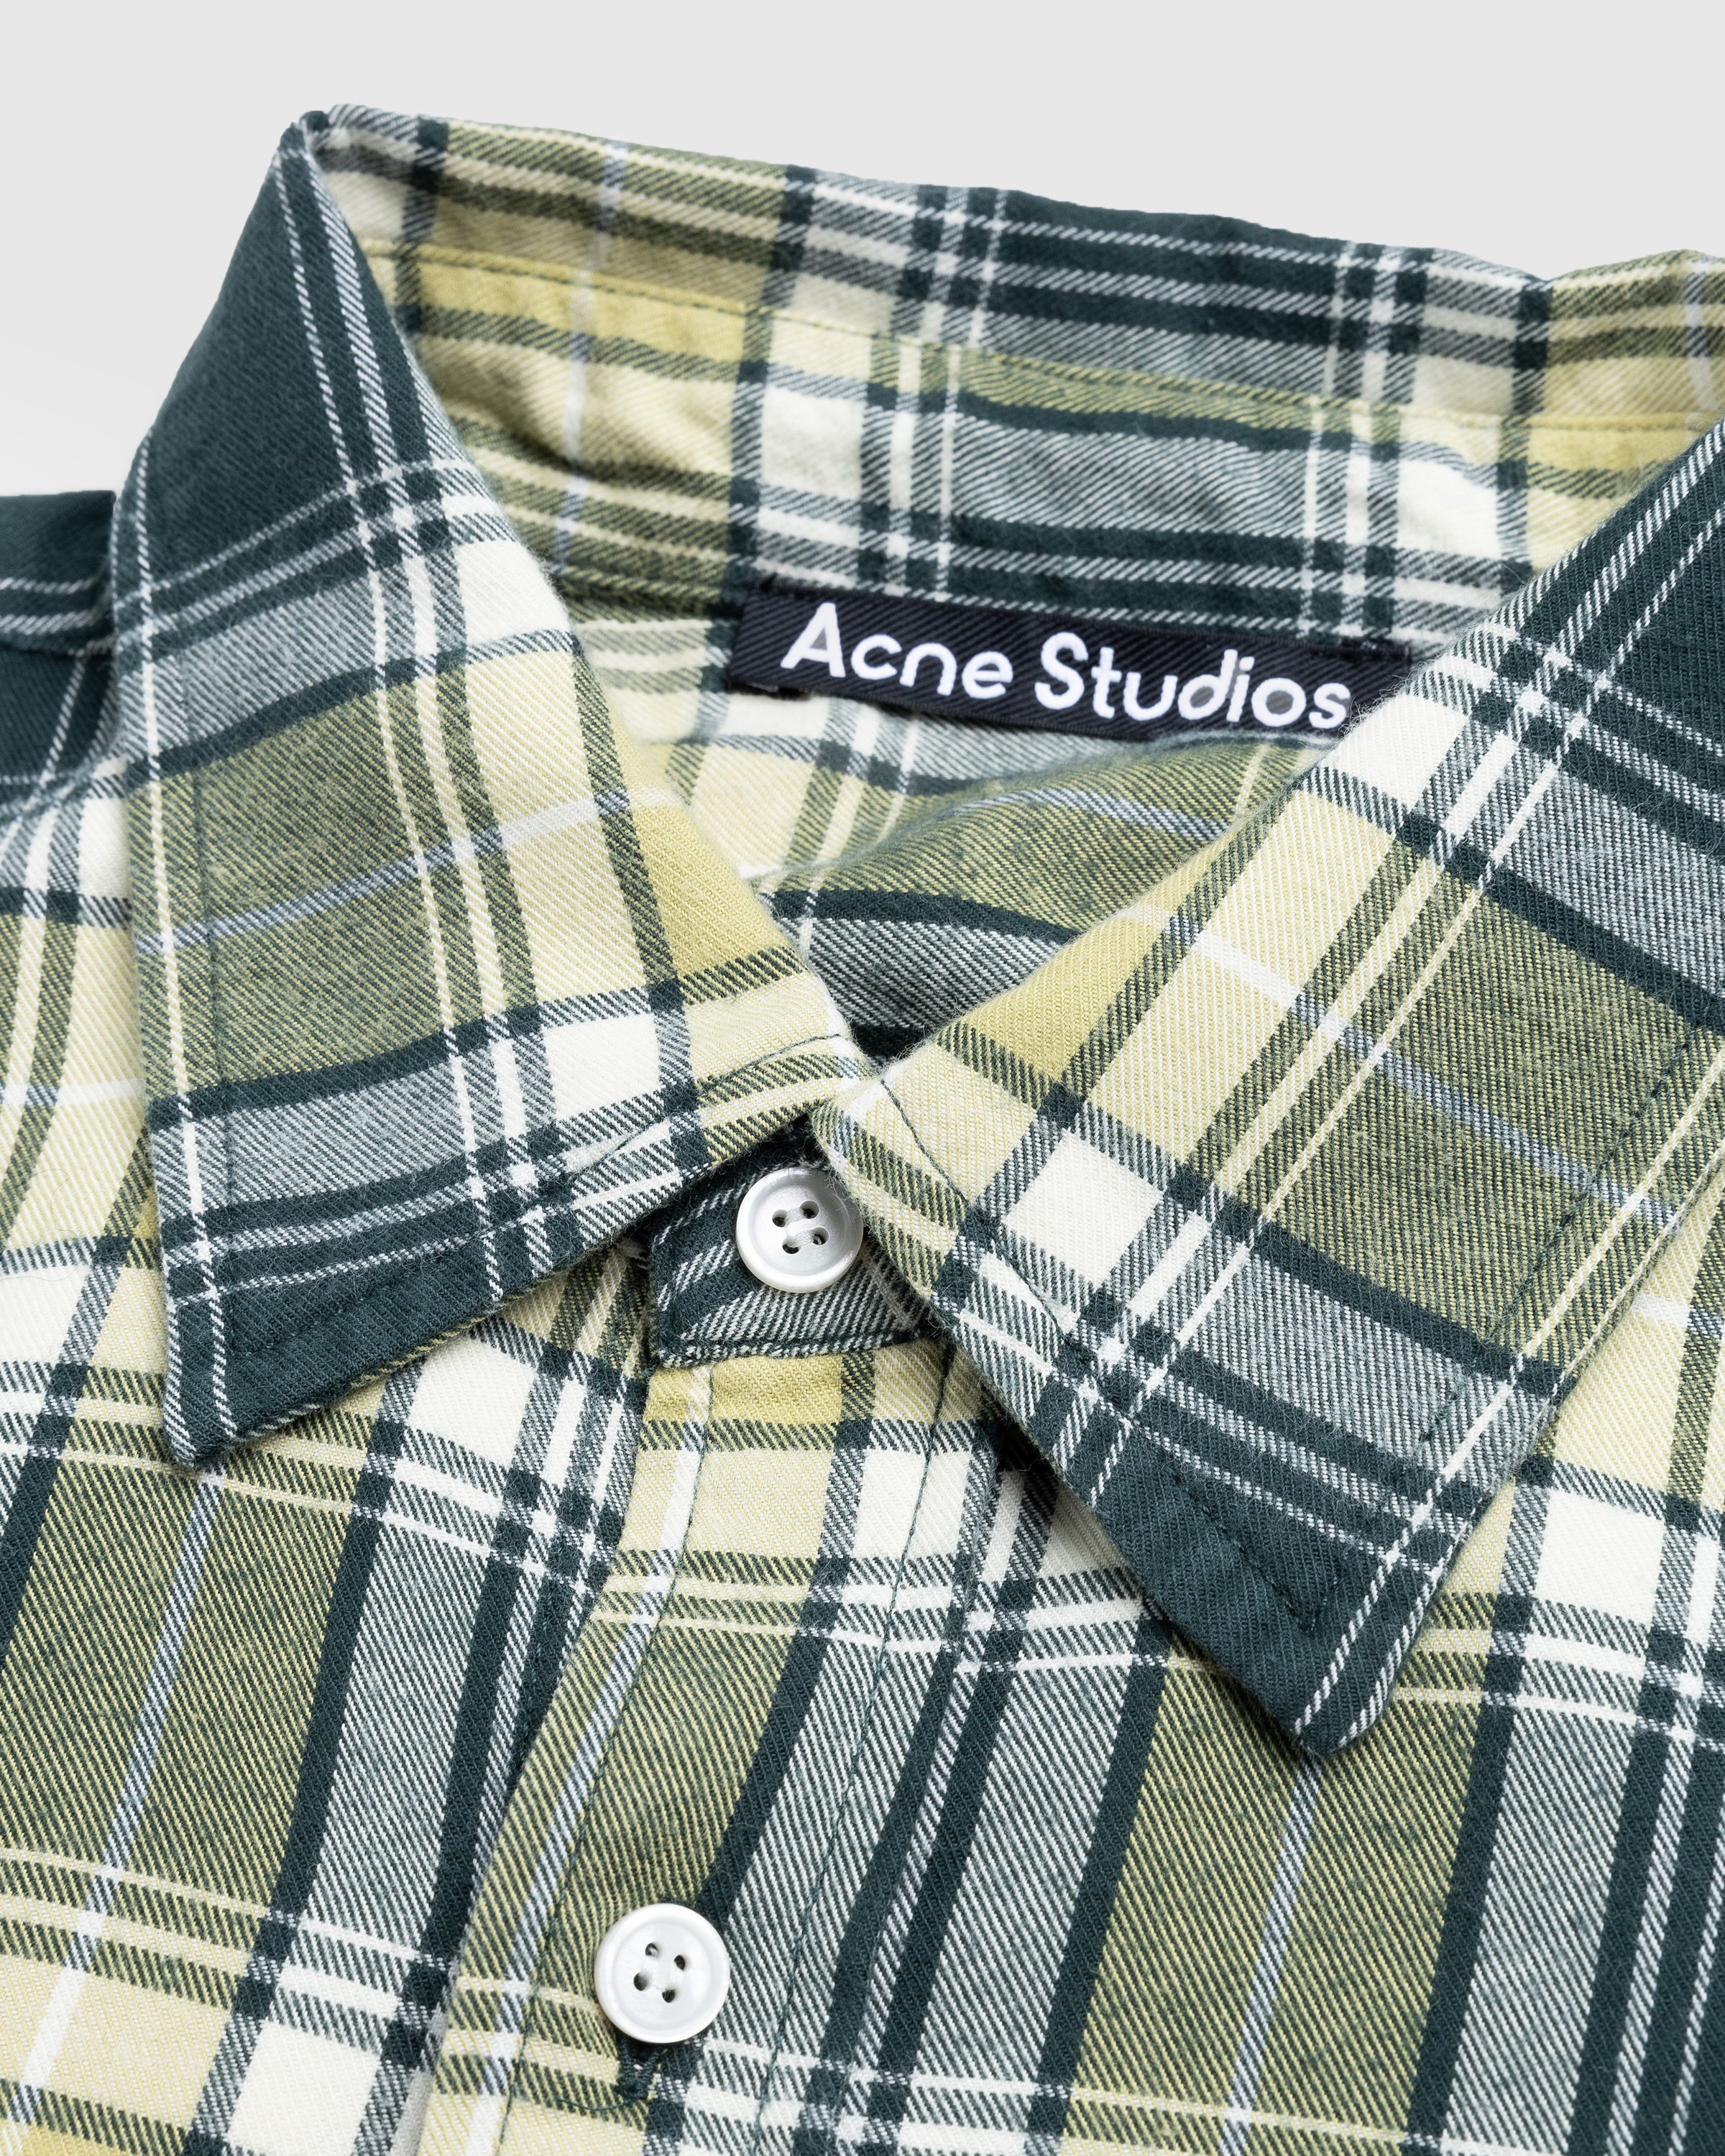 Acne Studios - Check Button-Up Shirt Forest Green/Light Green - Clothing - Green - Image 5